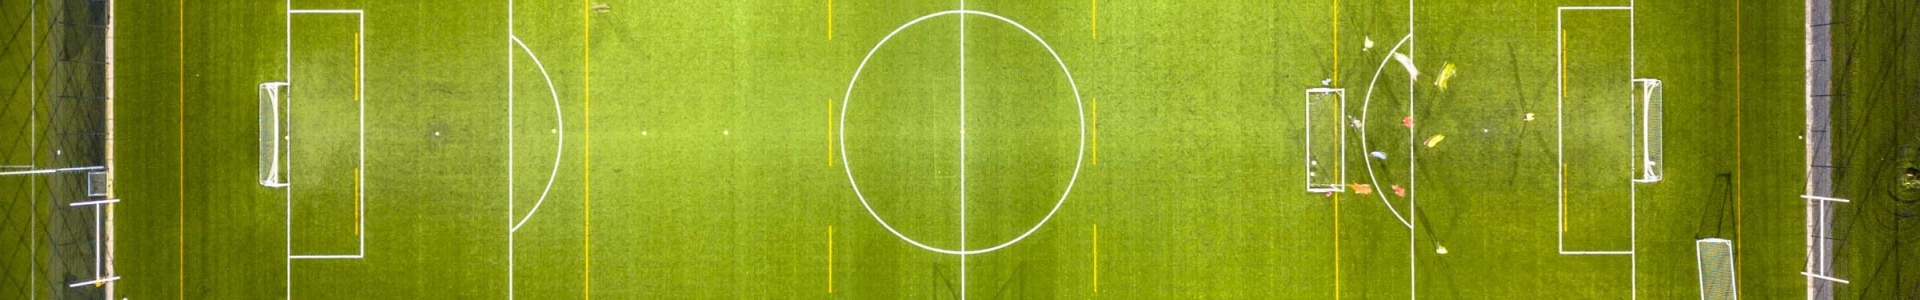 2aerial-view-of-soccer-field-at-night-FE4NQ2E